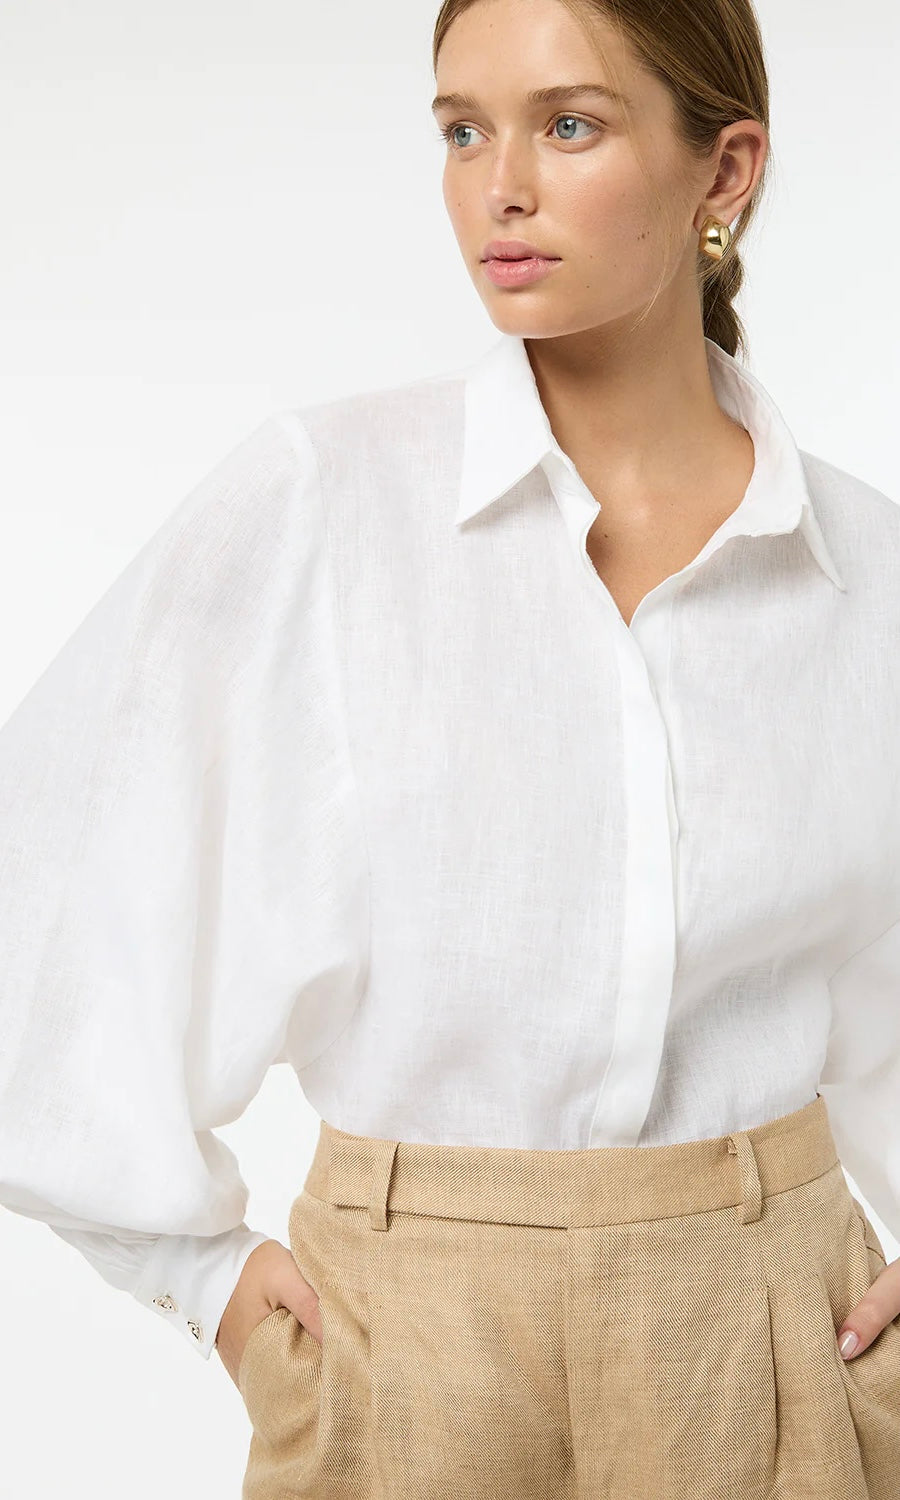 Manning Cartell New Volumes Blouse In White